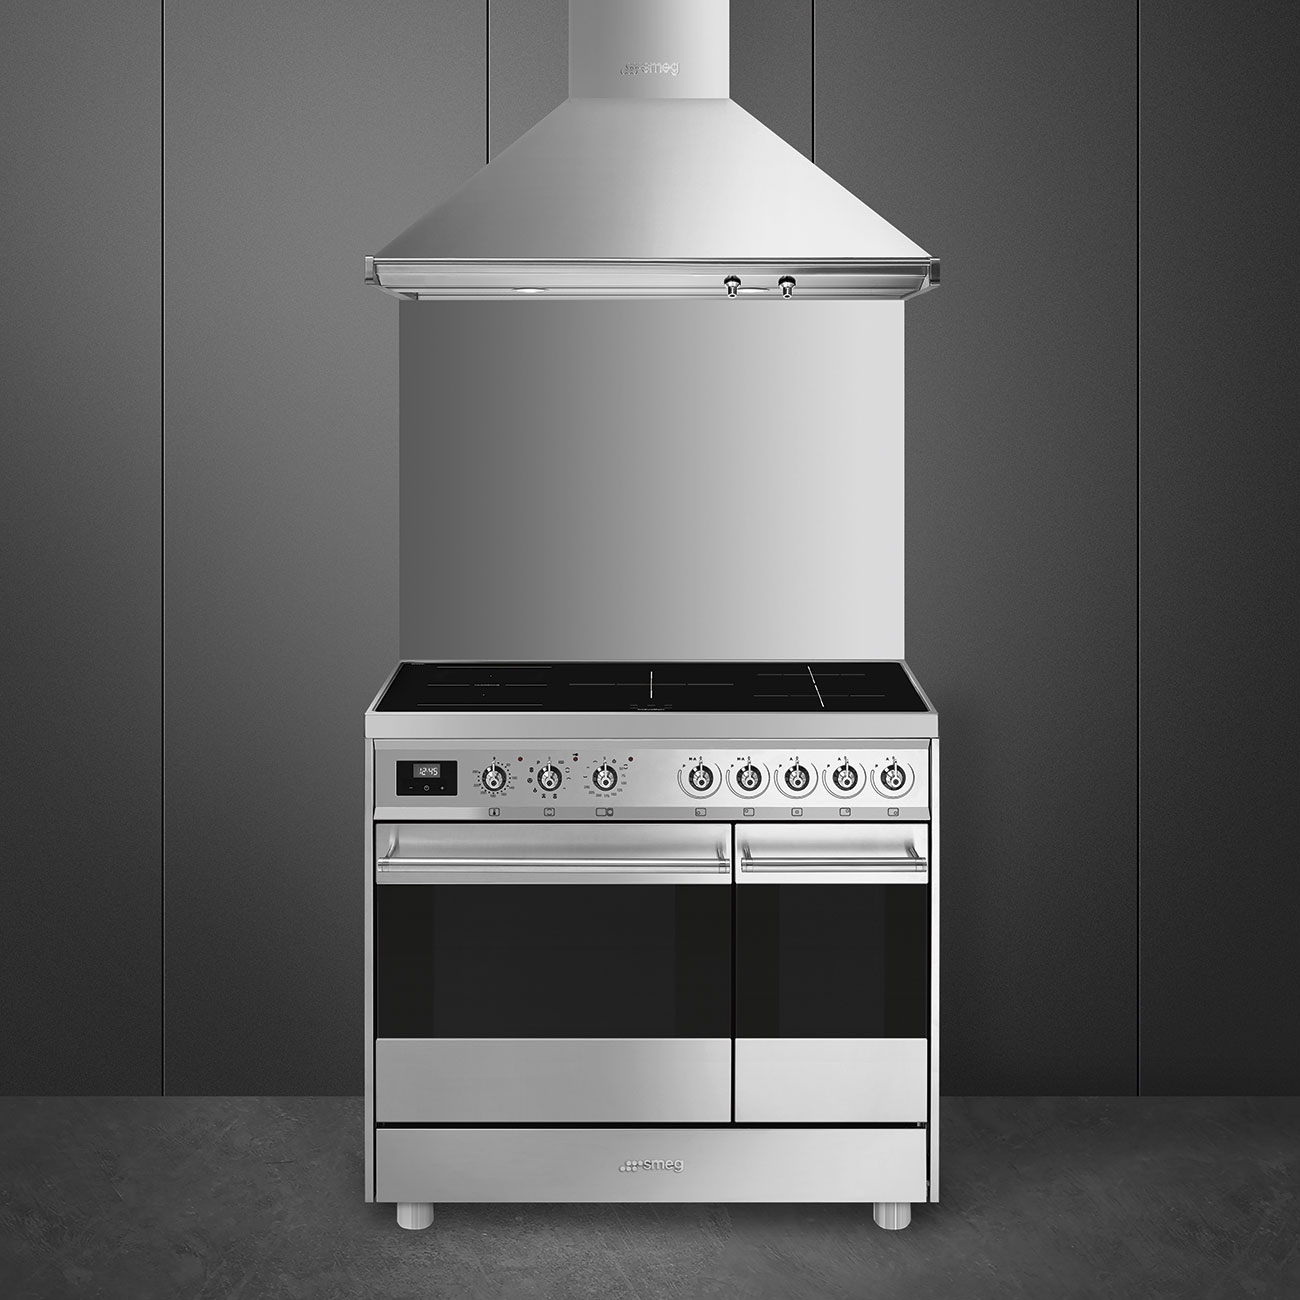 Smeg Stainless steel Cooker with Induction Hob_2